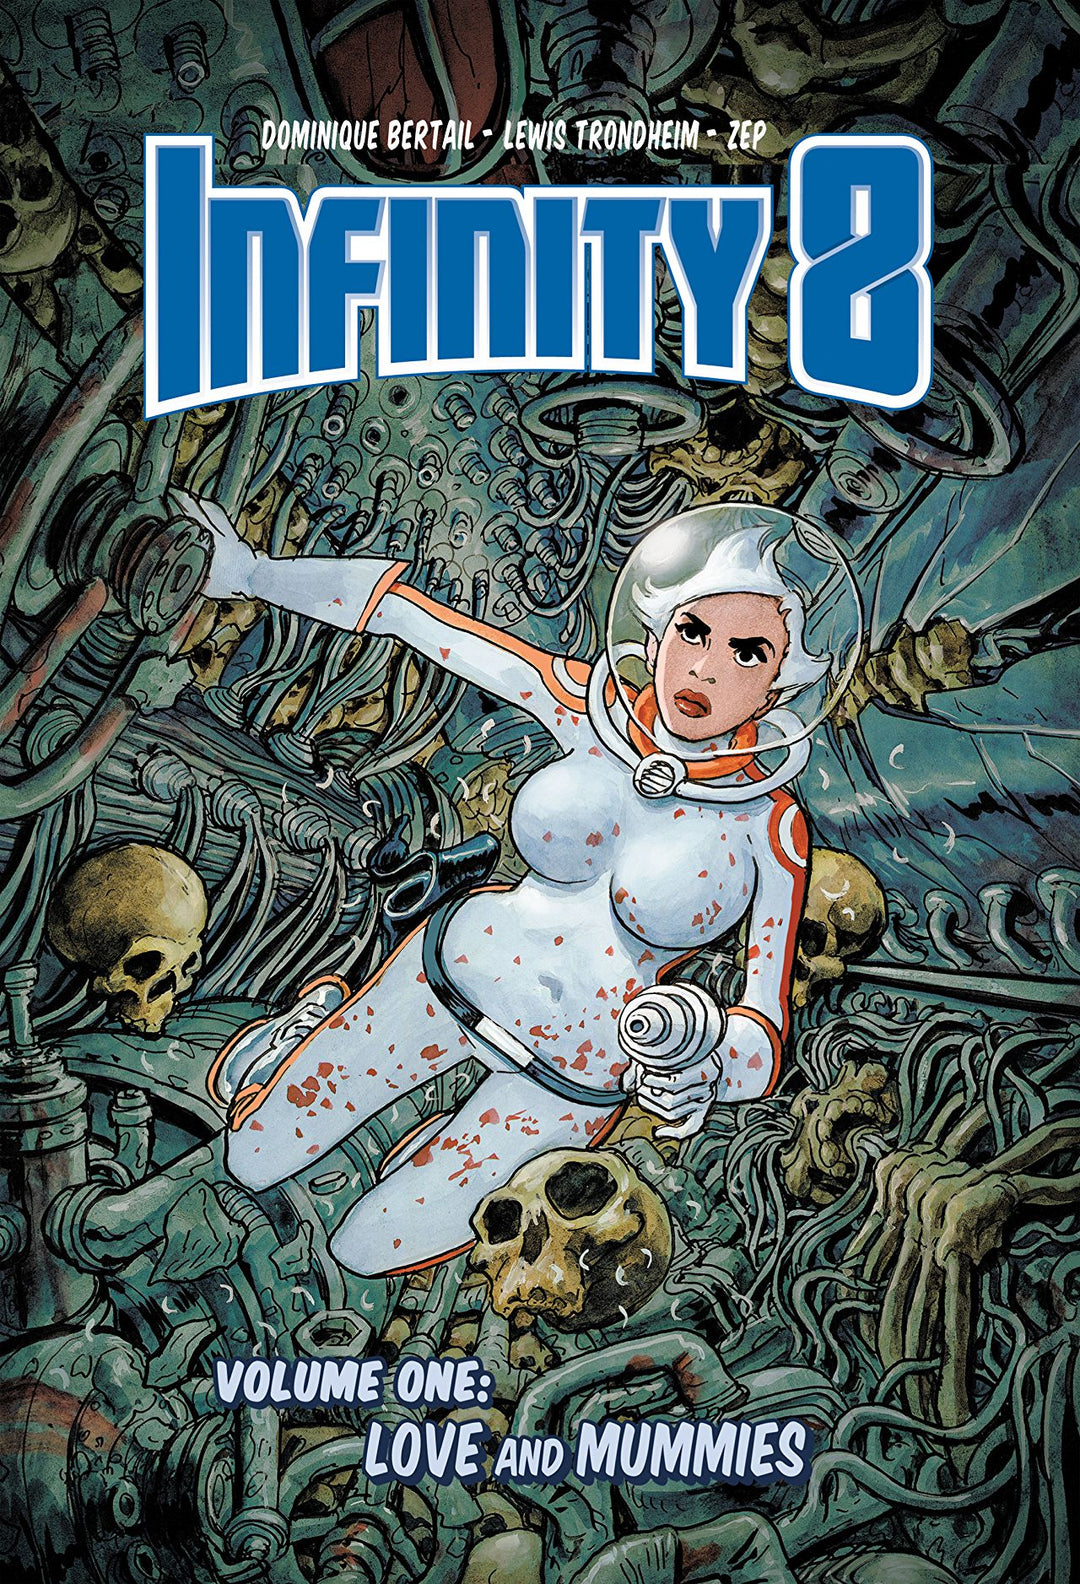 Infinity 8 Vol. 1: Love and Mummies- Signed 1st